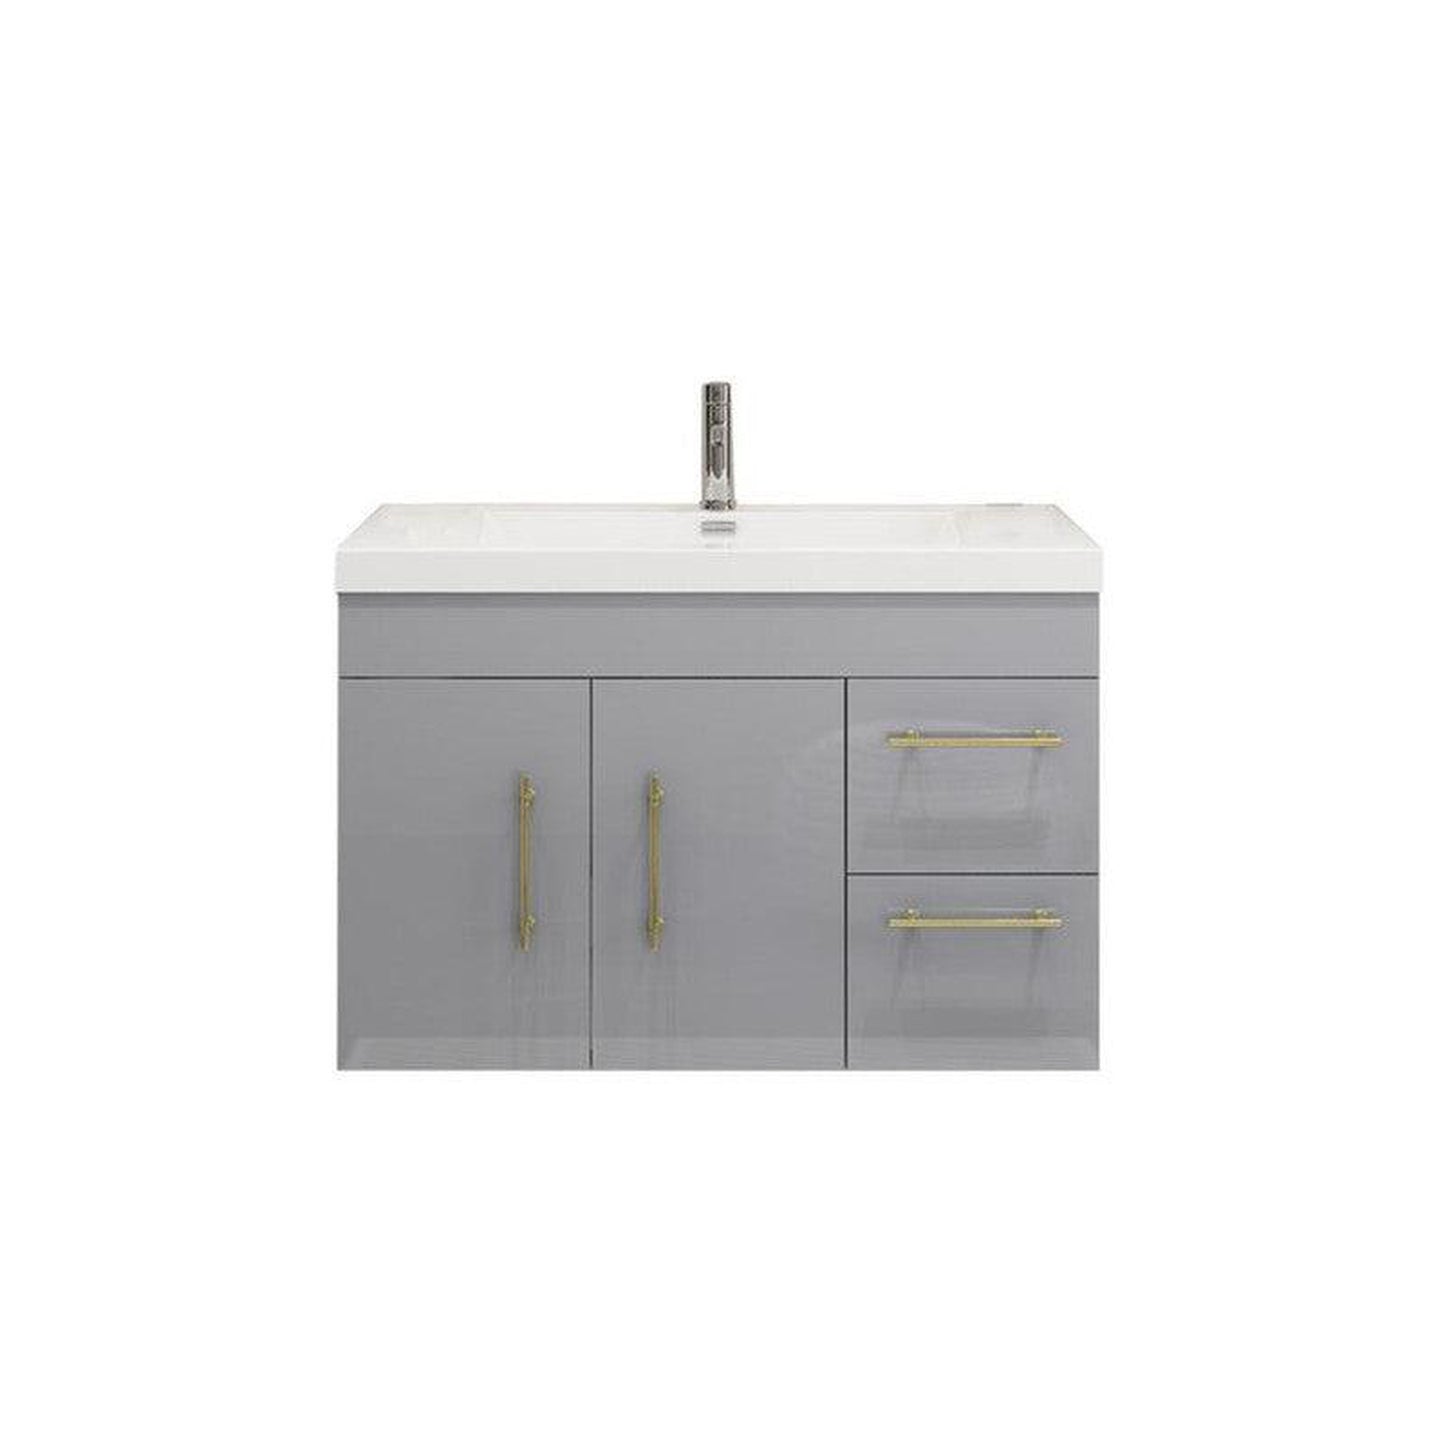 Moreno Bath ELSA 36" High Gloss Gray Wall-Mounted Vanity With Right Side Drawers and Single Reinforced White Acrylic Sink